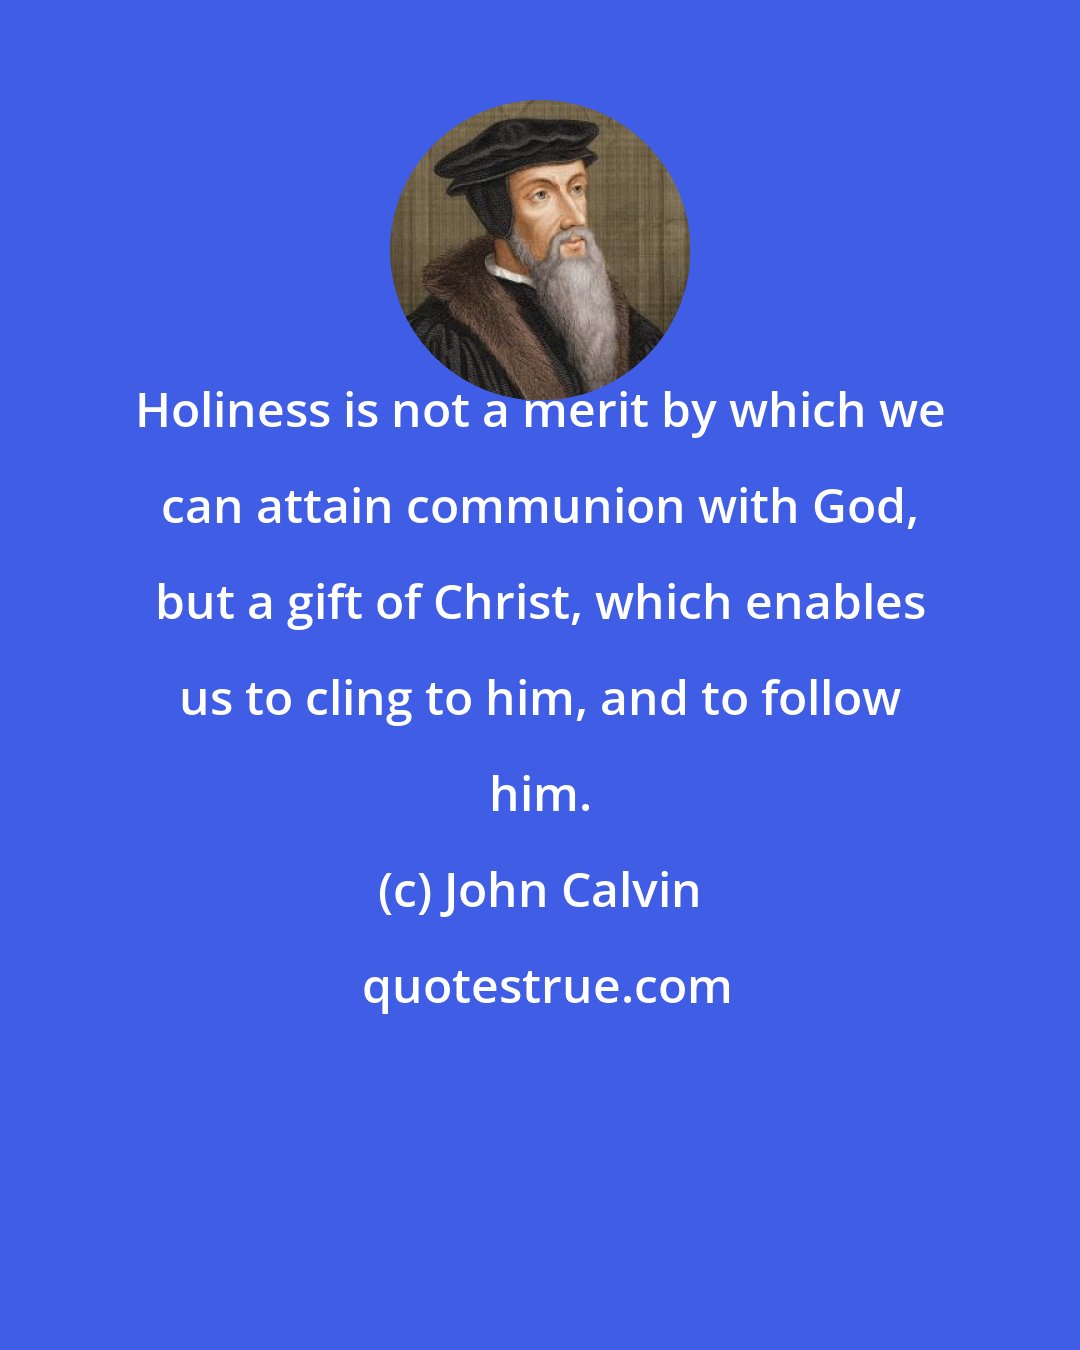 John Calvin: Holiness is not a merit by which we can attain communion with God, but a gift of Christ, which enables us to cling to him, and to follow him.